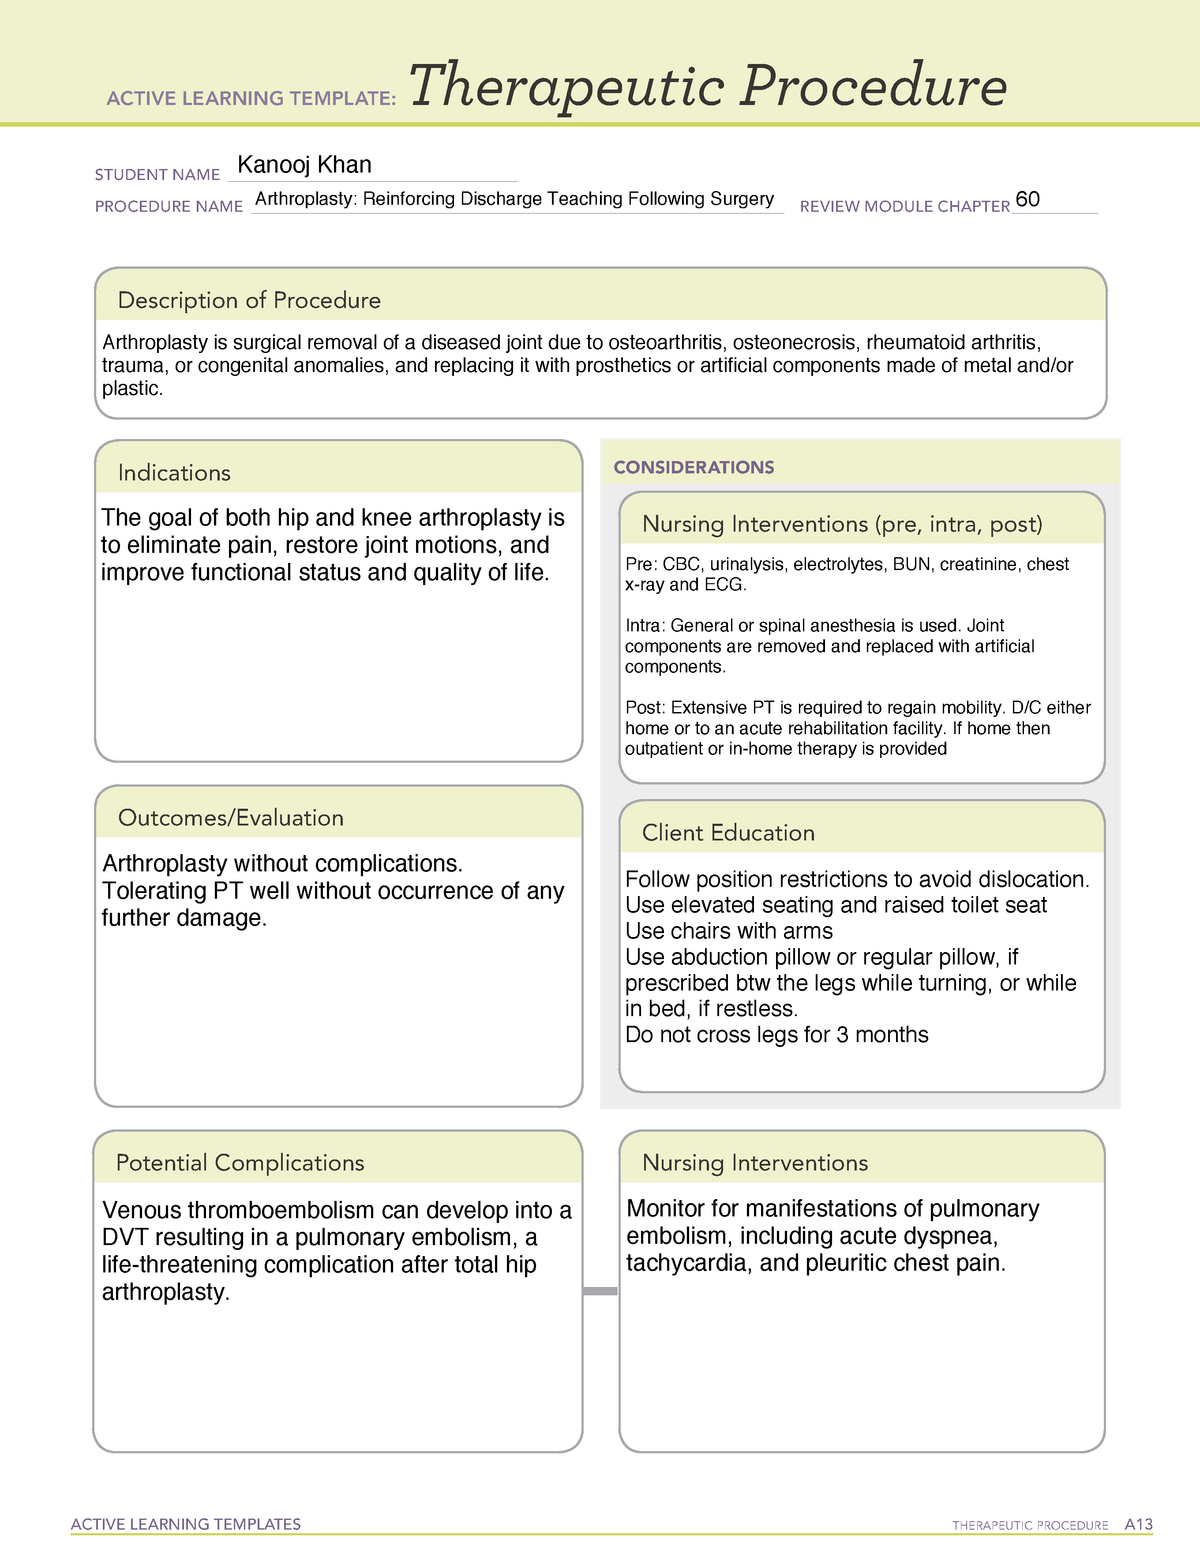 MED 1 ati ACTIVE LEARNING TEMPLATES THERAPEUTIC